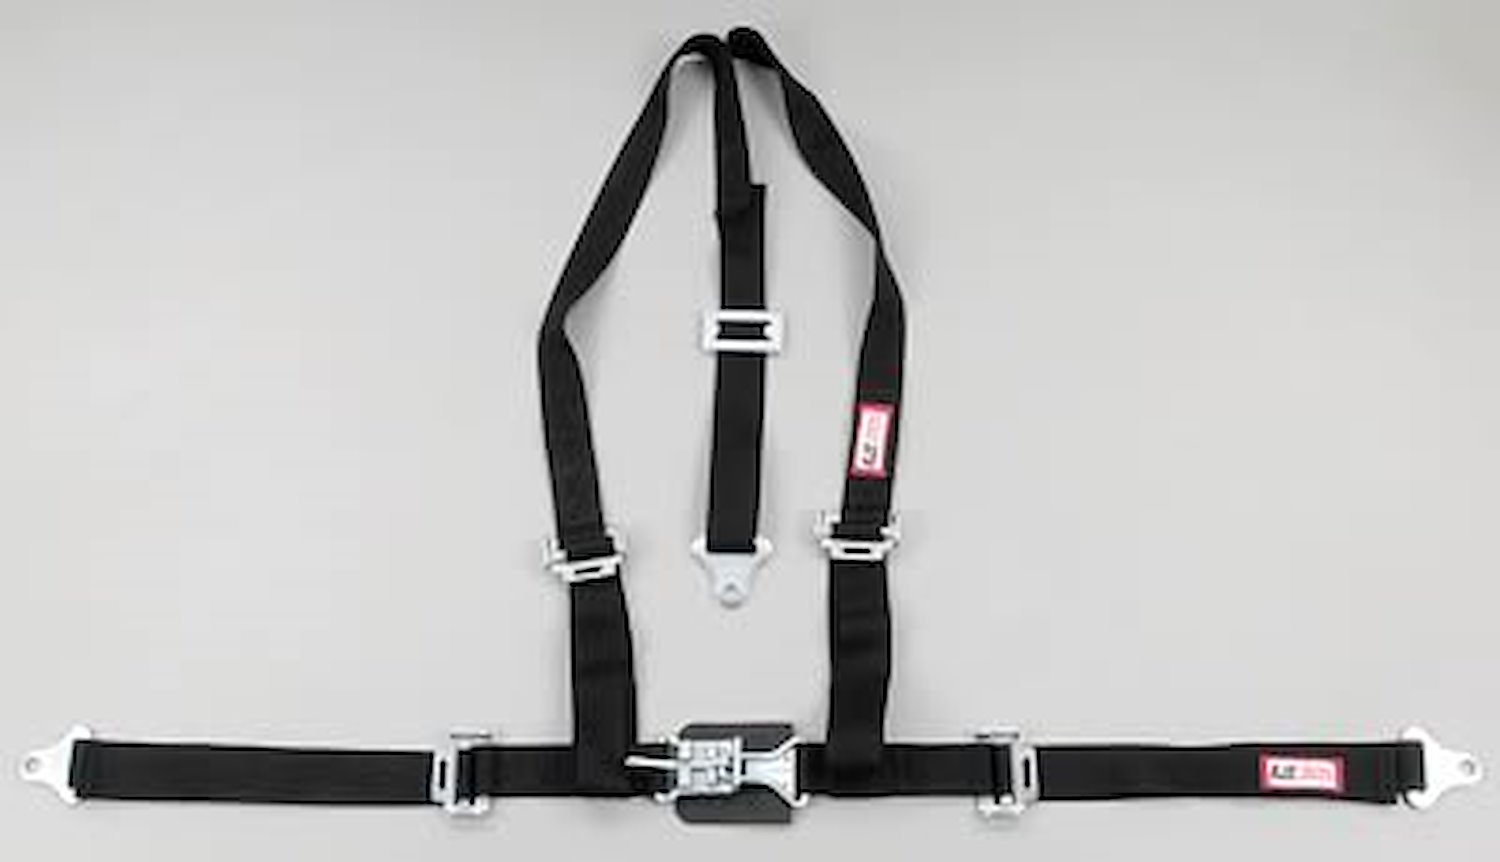 NON-SFI L&L HARNESS 2 PULL UP Lap Belt SNAP SEWN IN 2 S.H. INDIVIDUAL FLOOR Mount WRAP/SNAP GRAY